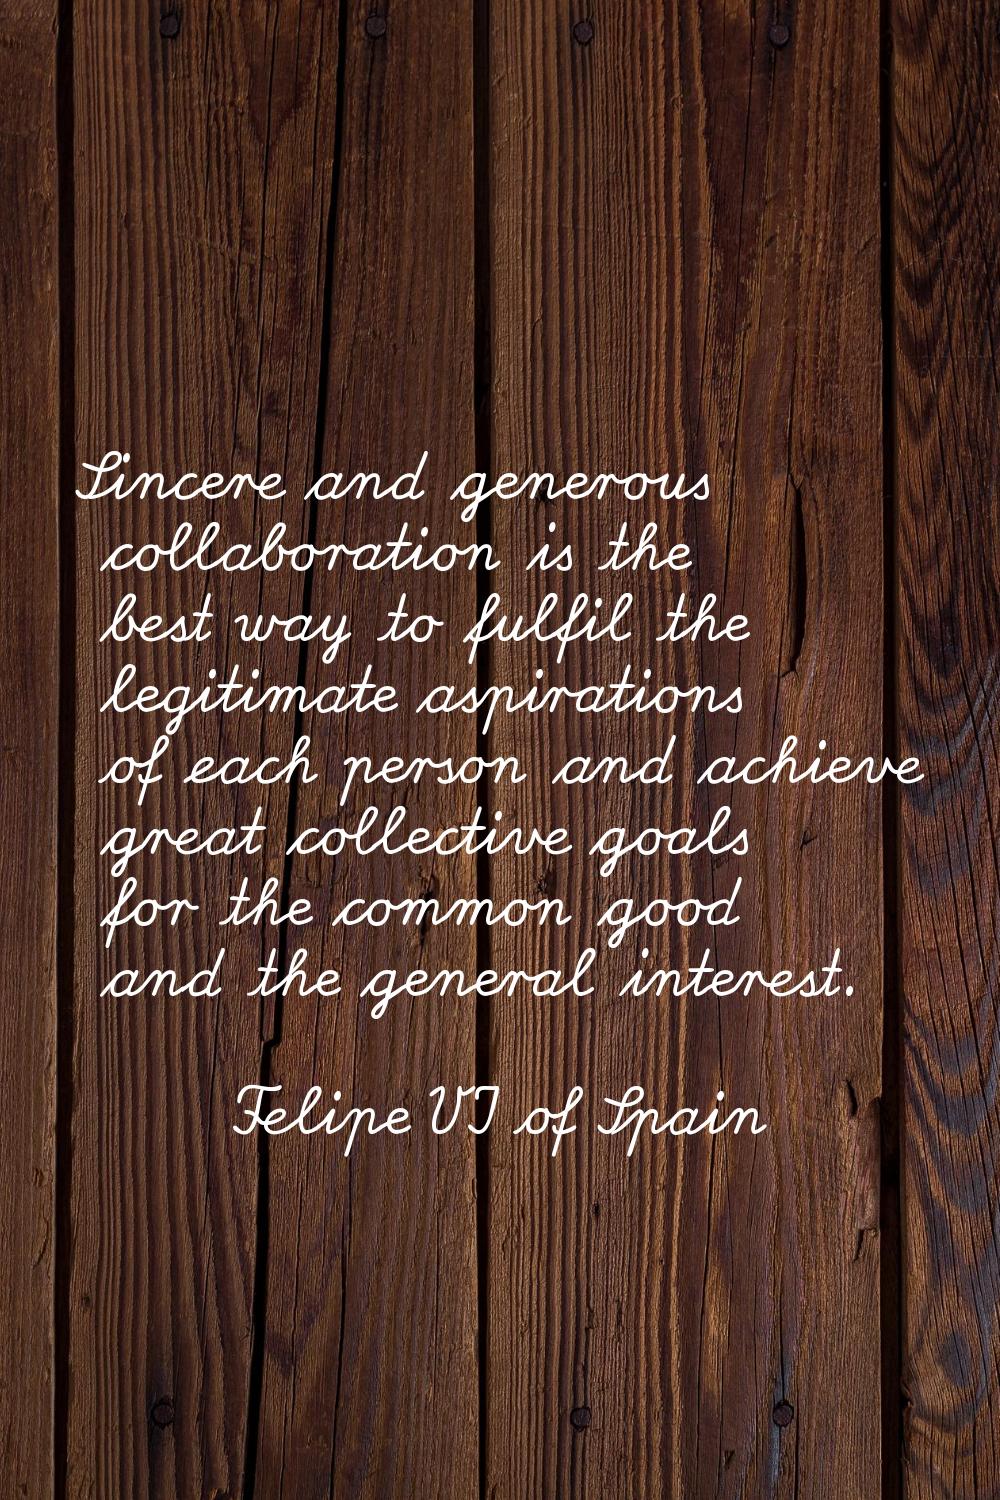 Sincere and generous collaboration is the best way to fulfil the legitimate aspirations of each per